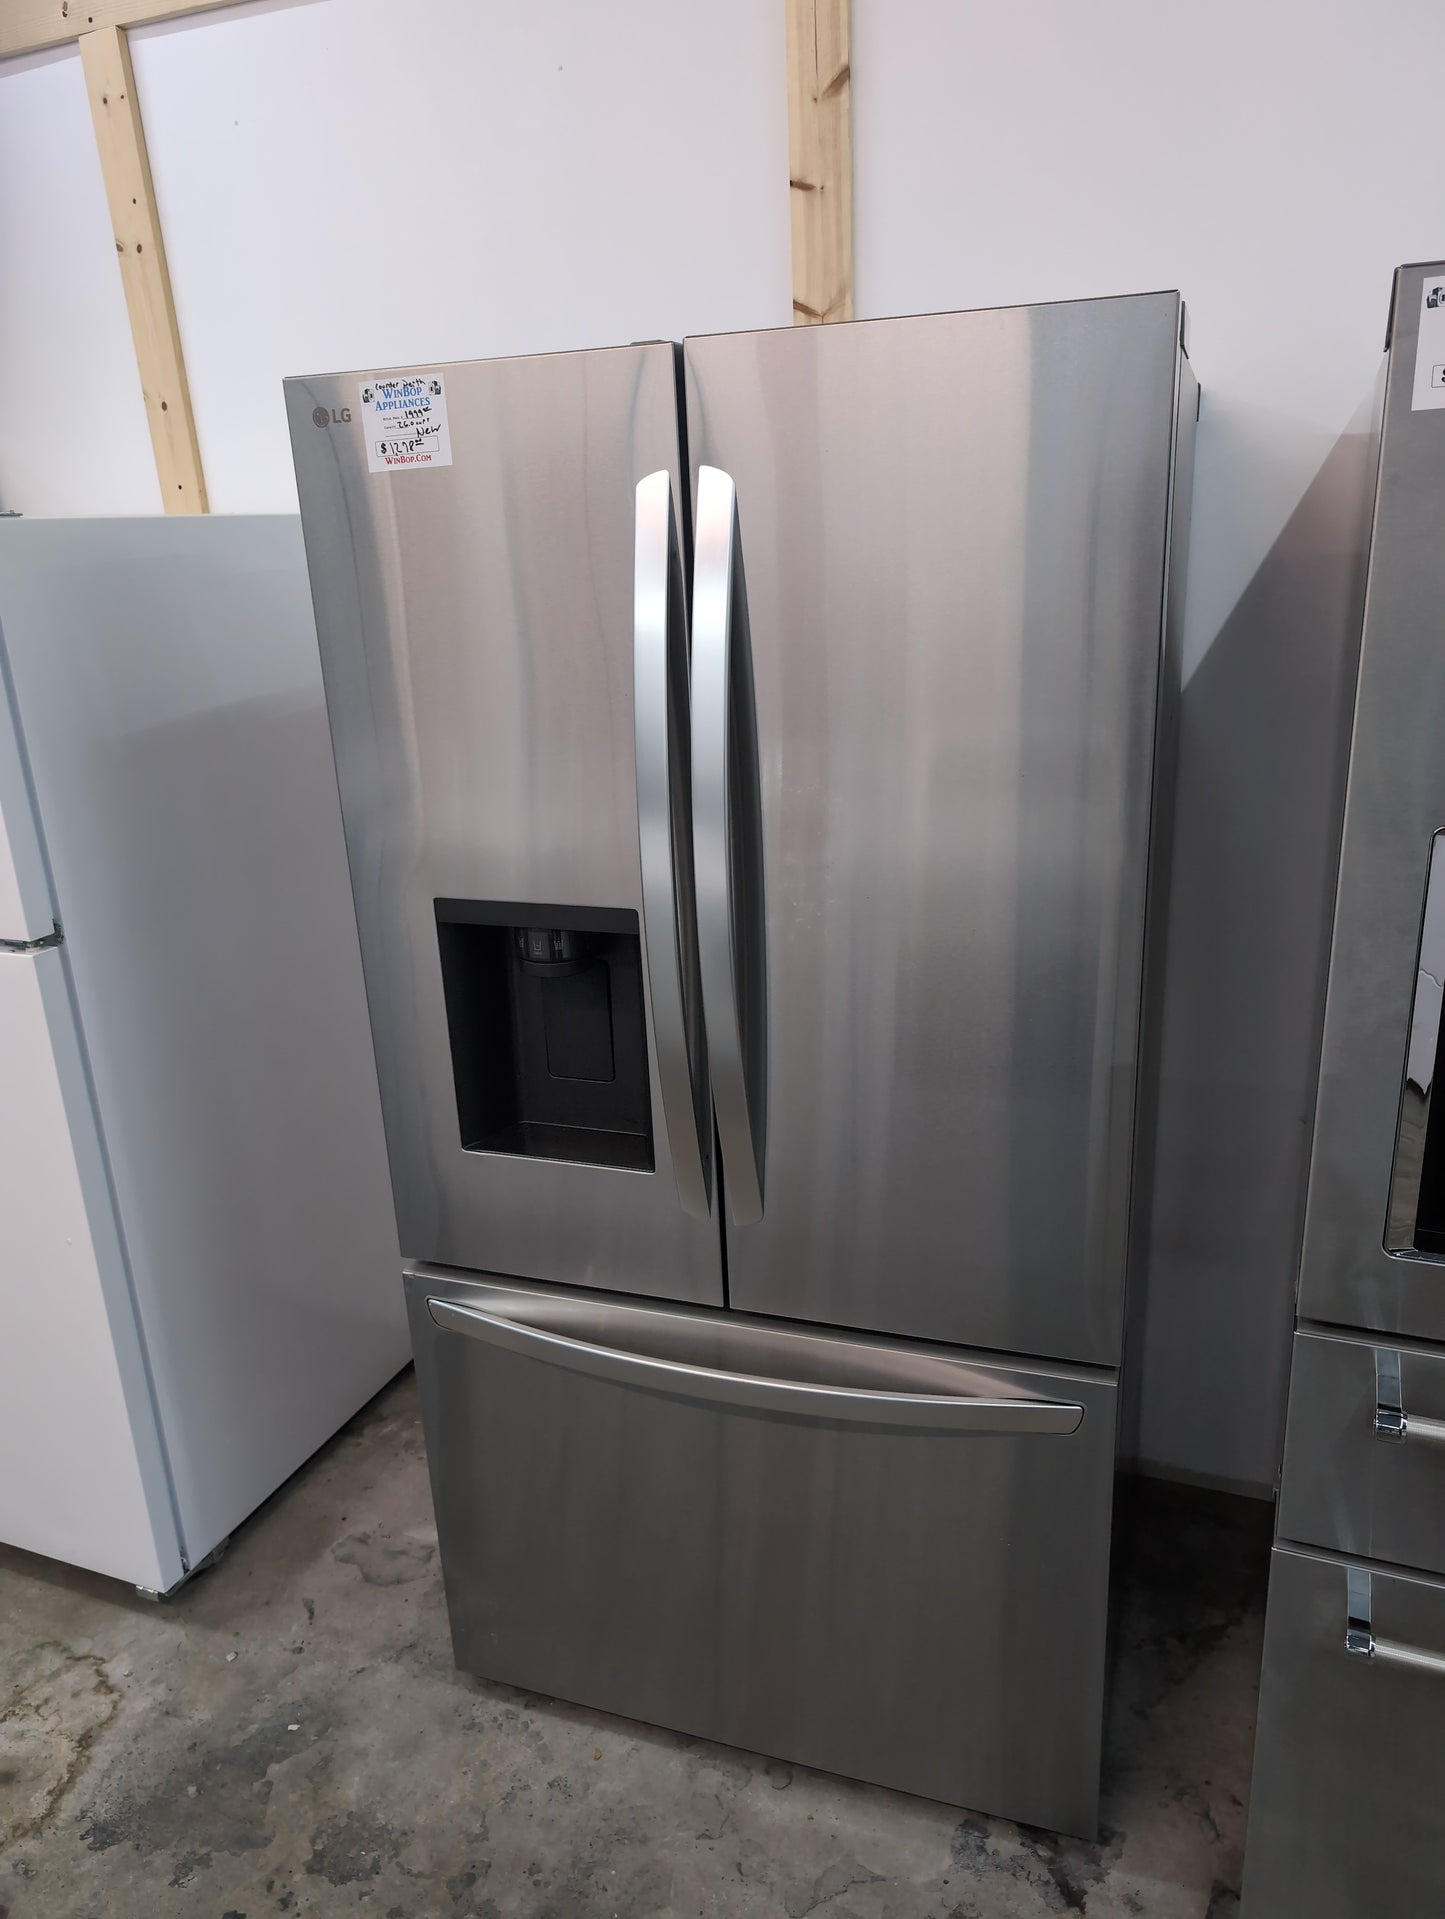 New LG 26 cubic foot French door refrigerator, stainless steel